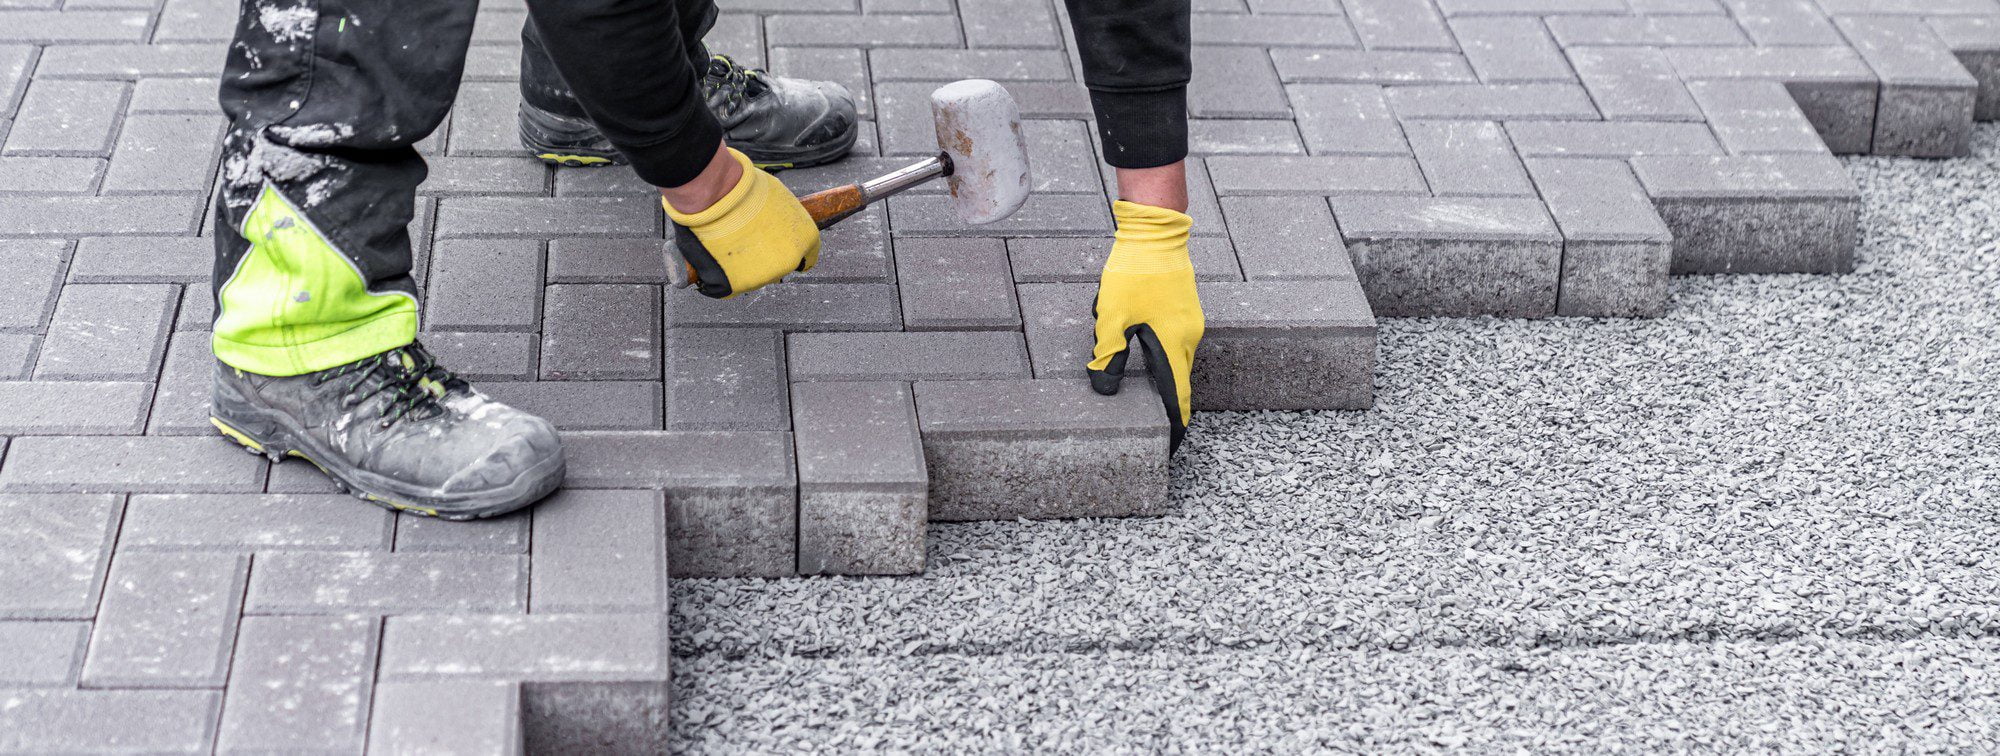 The image shows a close-up scene of two workers engaged in the process of laying paving stones. One worker is holding a rubber mallet, which is typically used for tapping the paving stones into place without causing damage, while the other is positioning a stone using hands wearing bright yellow gloves for protection. The stones are being positioned on a bed of fine gravel, which is commonly used as a base for paving installations to ensure proper drainage and a stable foundation. You can see that part of the paved area is already completed, while the rest is still being constructed. The workers appear to be wearing protective clothing suitable for manual outdoor work, including sturdy boots, one of which has a visible fluorescent green mark, likely for safety visibility purposes.